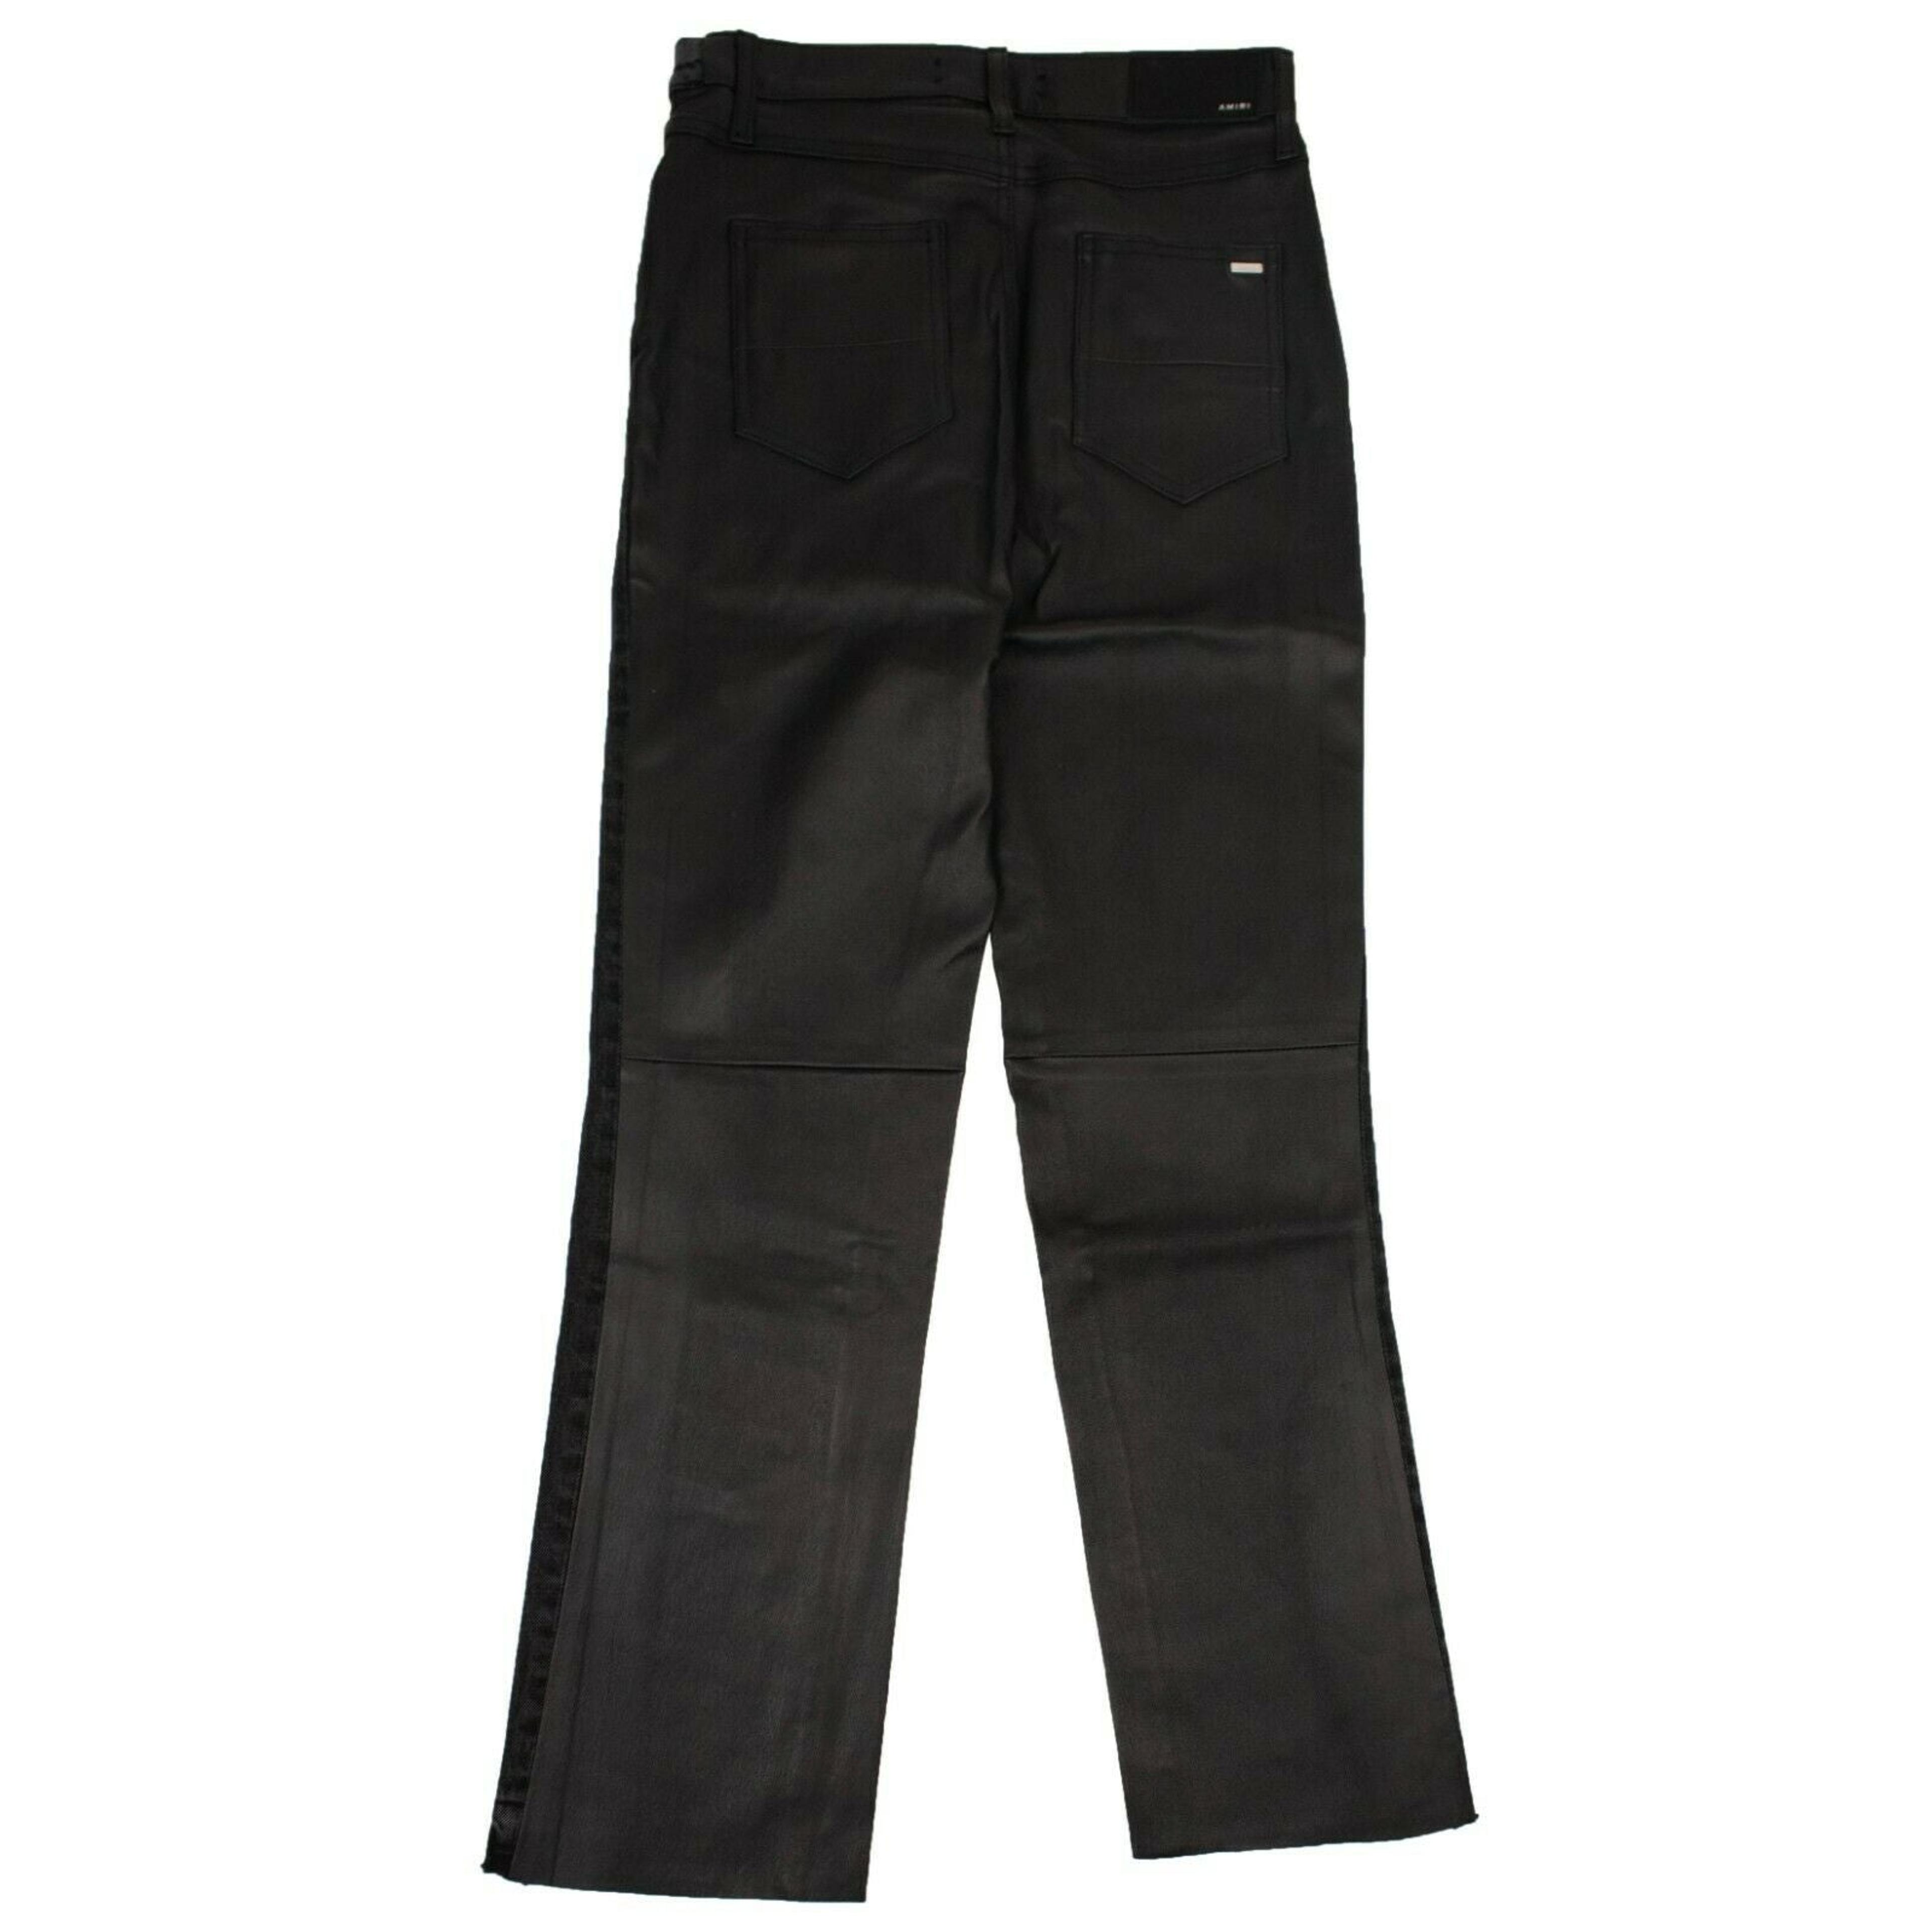 Alternate View 4 of Women's Black Leather Hybrid Cropped Jeans